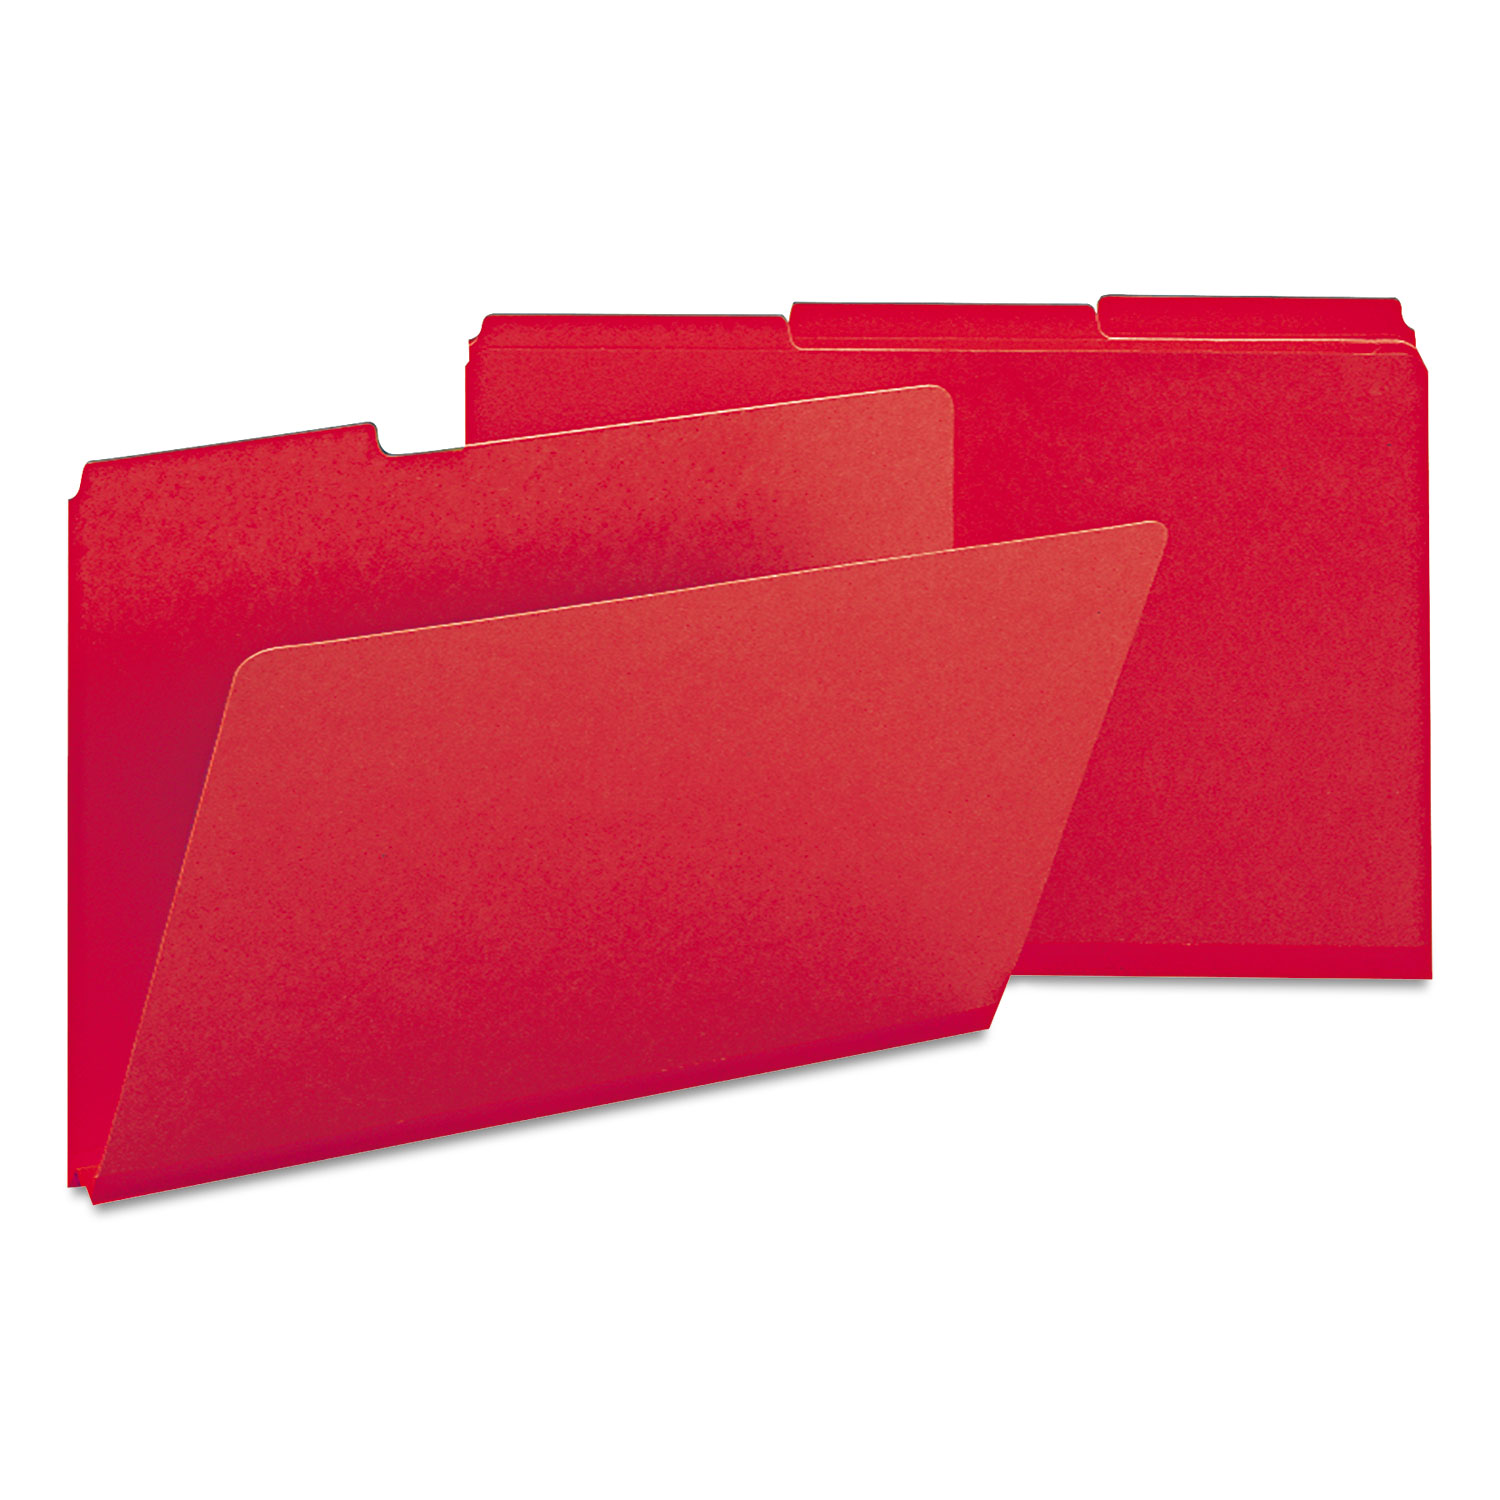 TAB Pressboard Expansion Folder Letter Size Executive Red 25/Box 